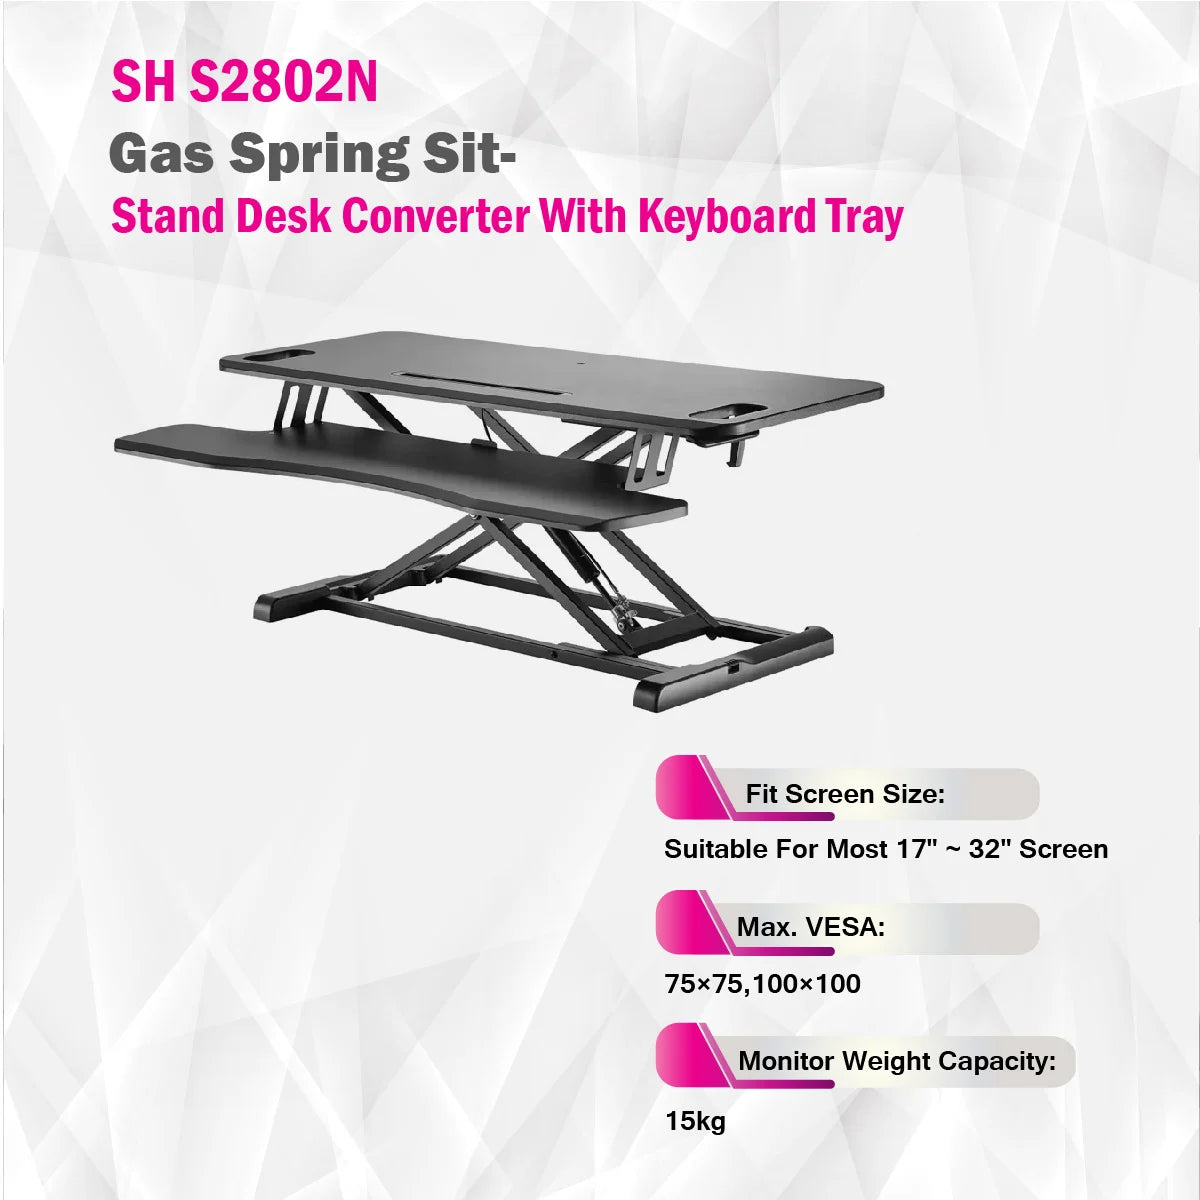 Skill Tech SHS28 02N | Gas Spring Sit-Stand Desk Converter With Keyboard Tray Ergonomic Mount